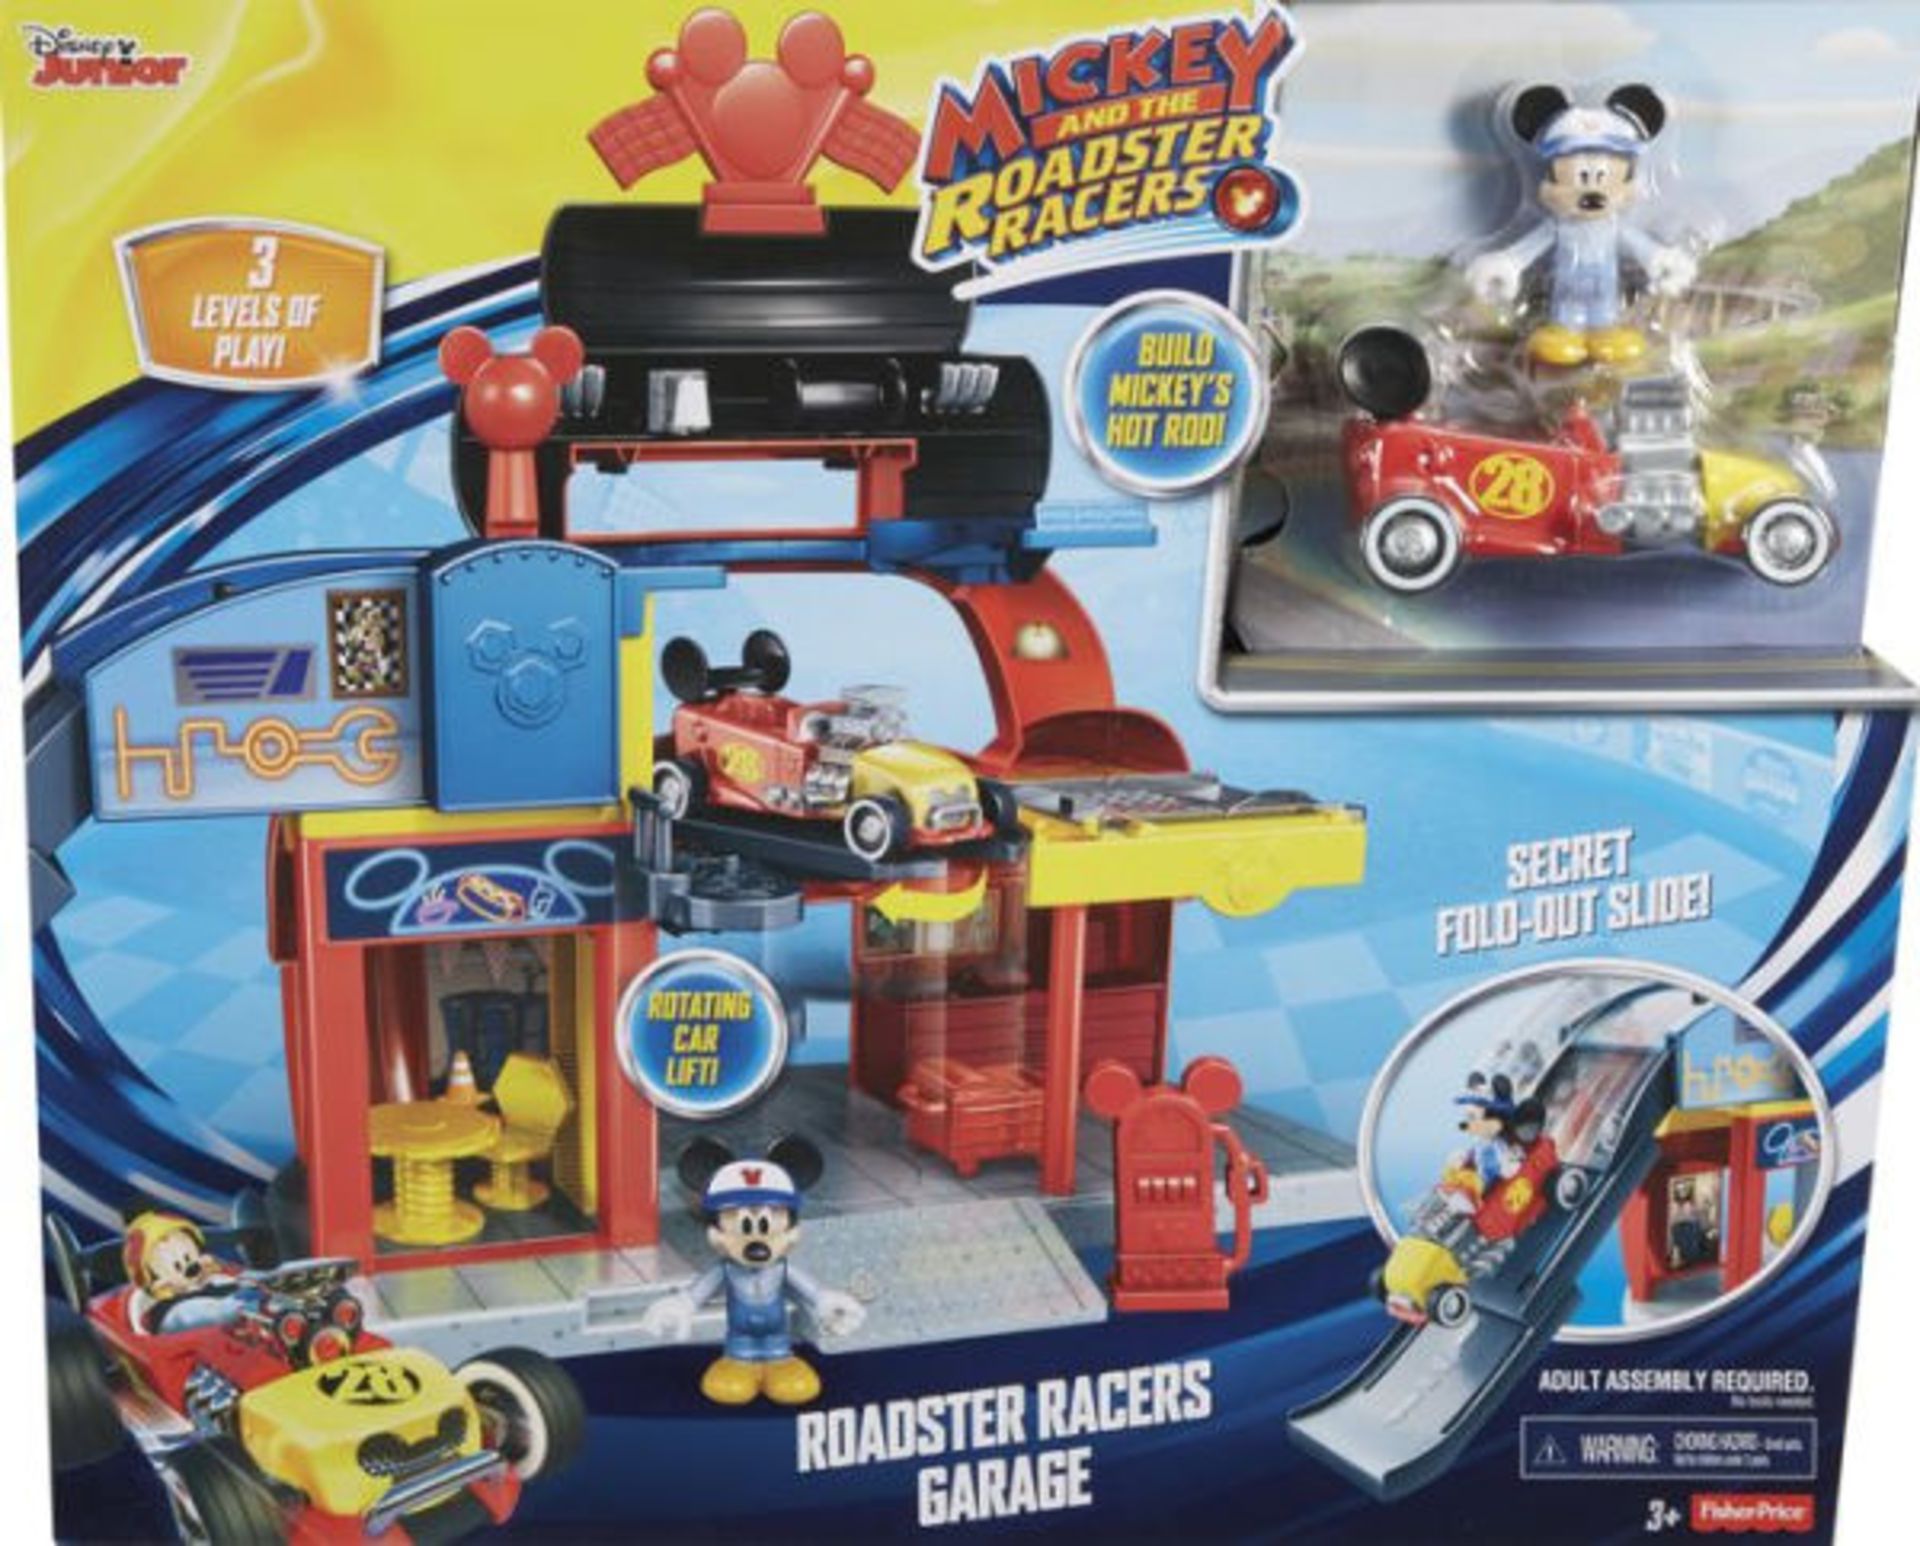 + VAT Brand New Disney Mickey and the Roadster Racers Garage - 3 Levels of Play - Rotating Car Lift